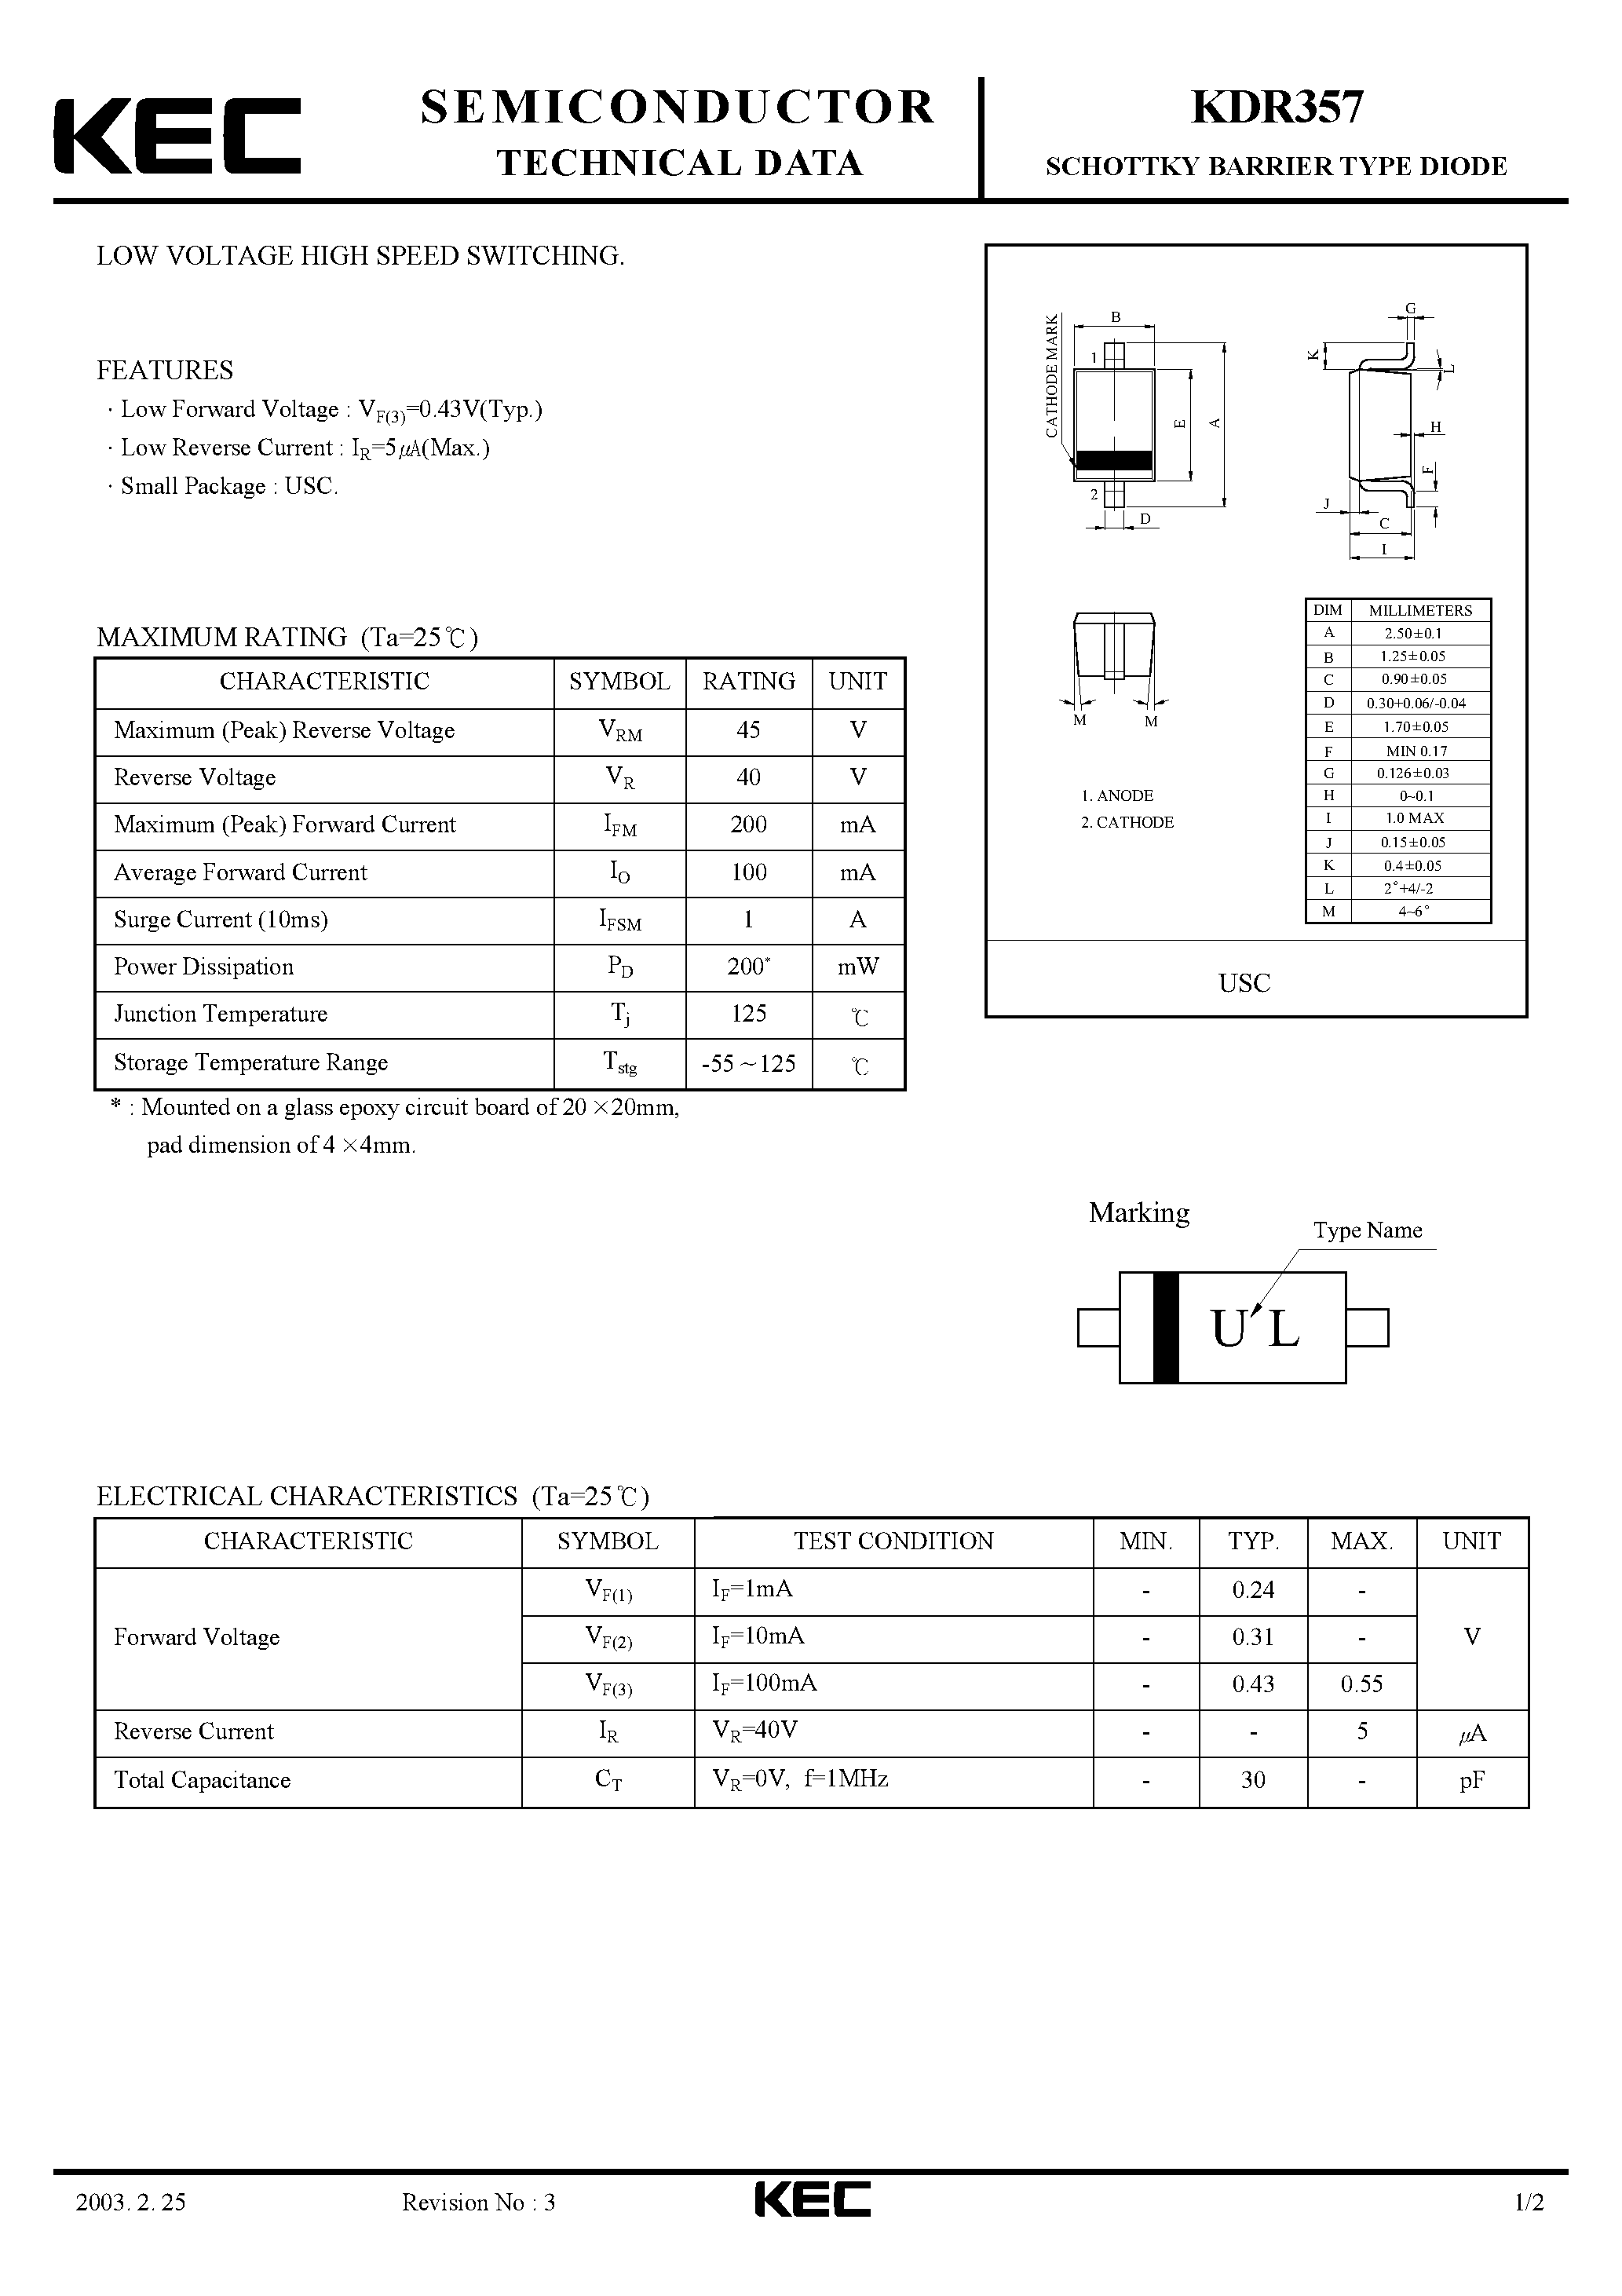 Datasheet KDR357 - SCHOTTKY BARRIER TYPE DIODE(LOW VOLTAGE HIGH SPEED SWITCHING) page 1